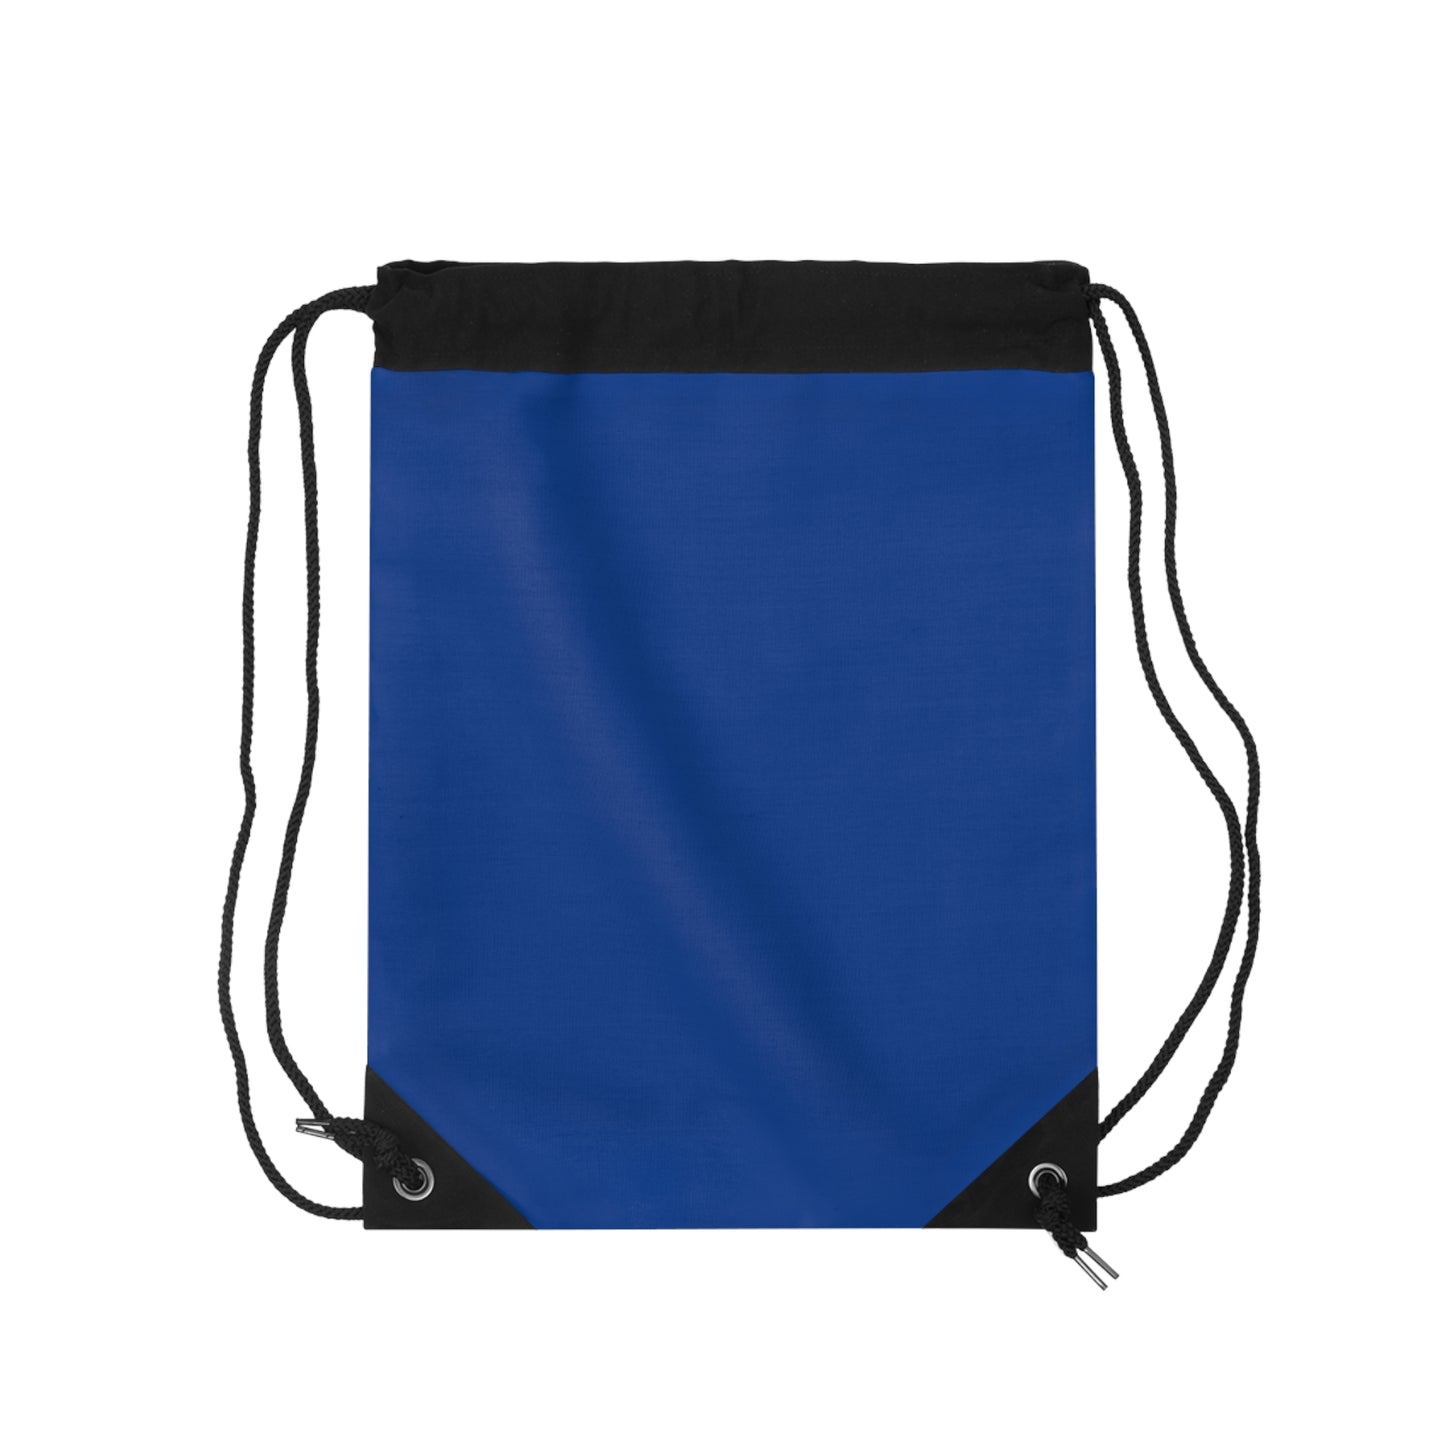 Humbled By God To Be Elevated Above All Drawstring Bag